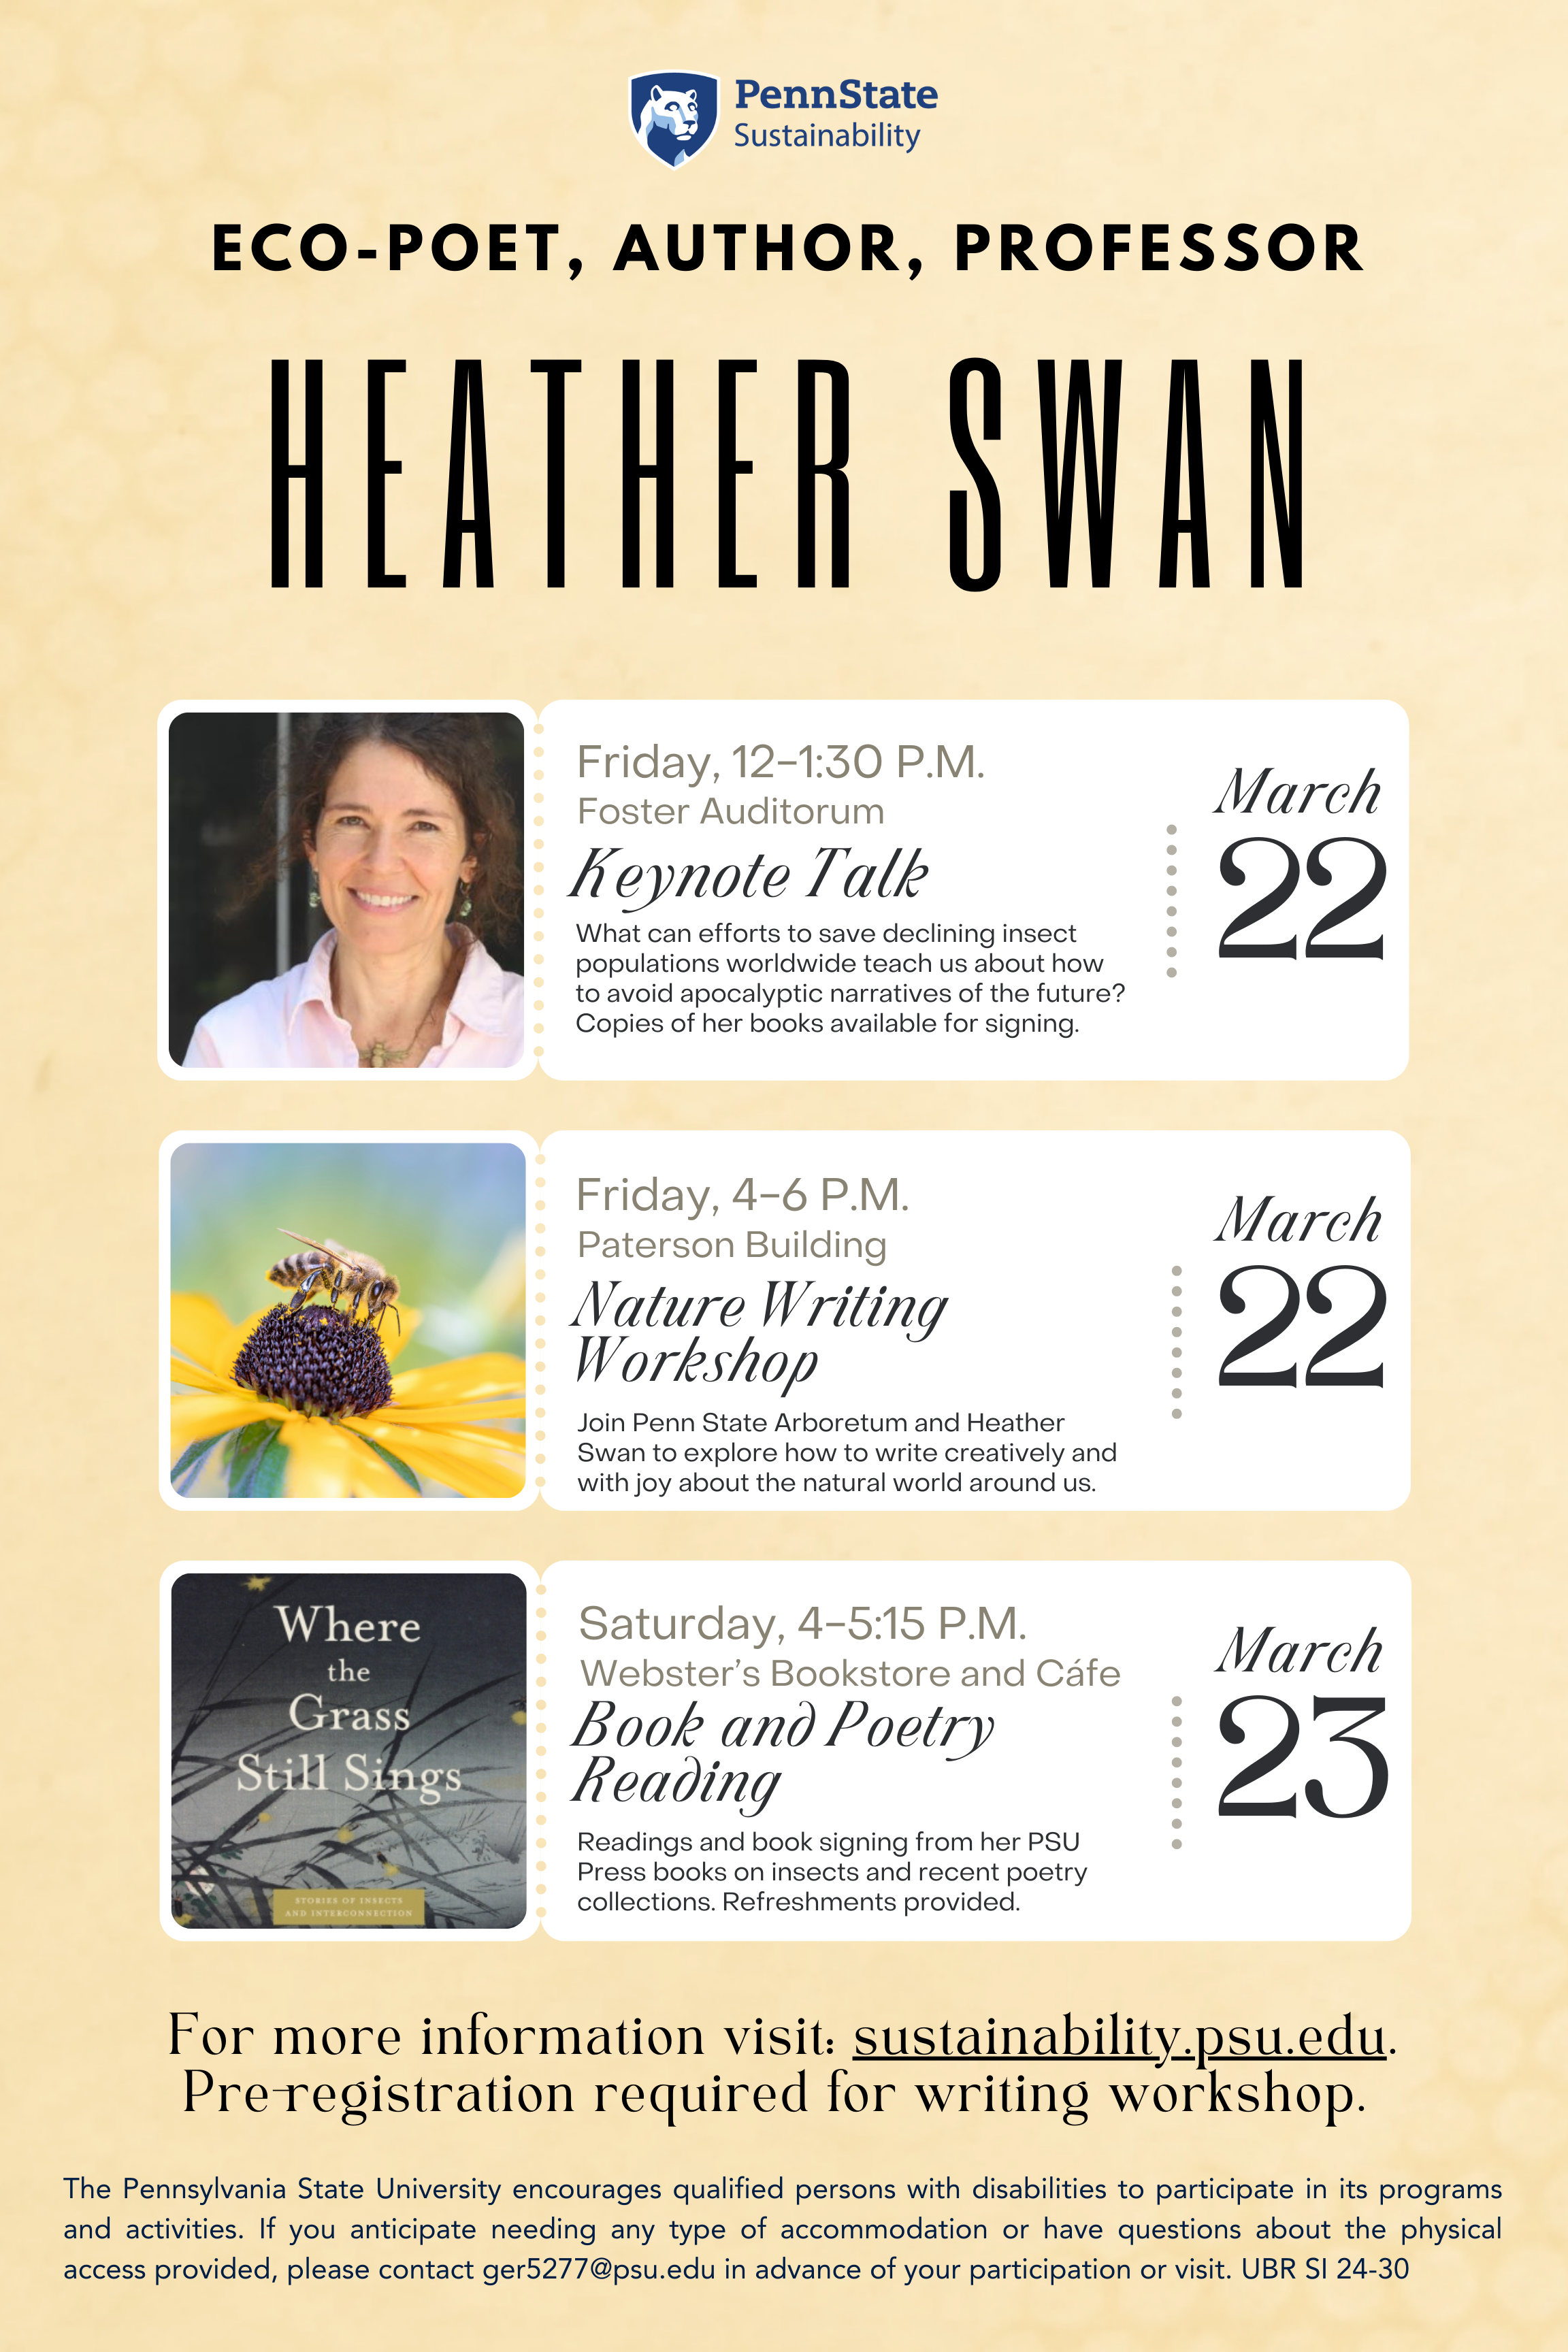 Image of flyer for Heather Swan's visit to Penn State